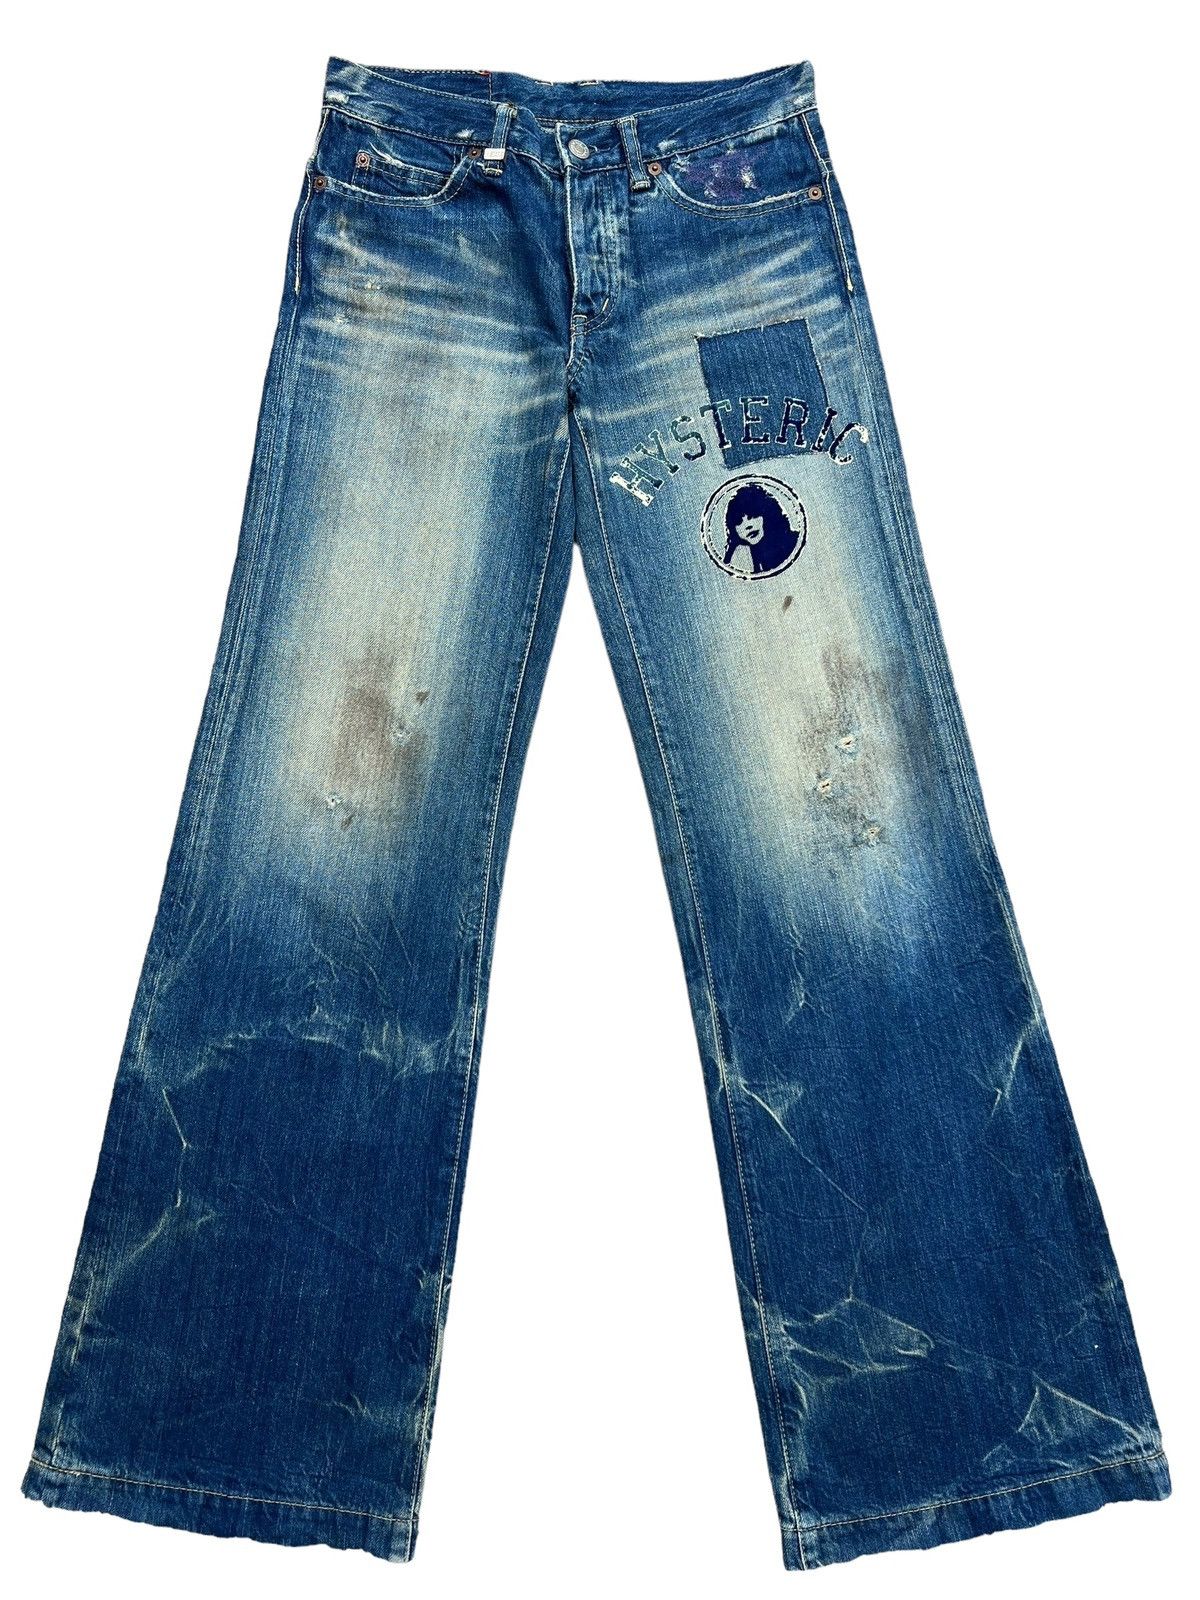 Hysteric Glamour Distressed Lowrise Flare Denim Jeans 29x32 - 2